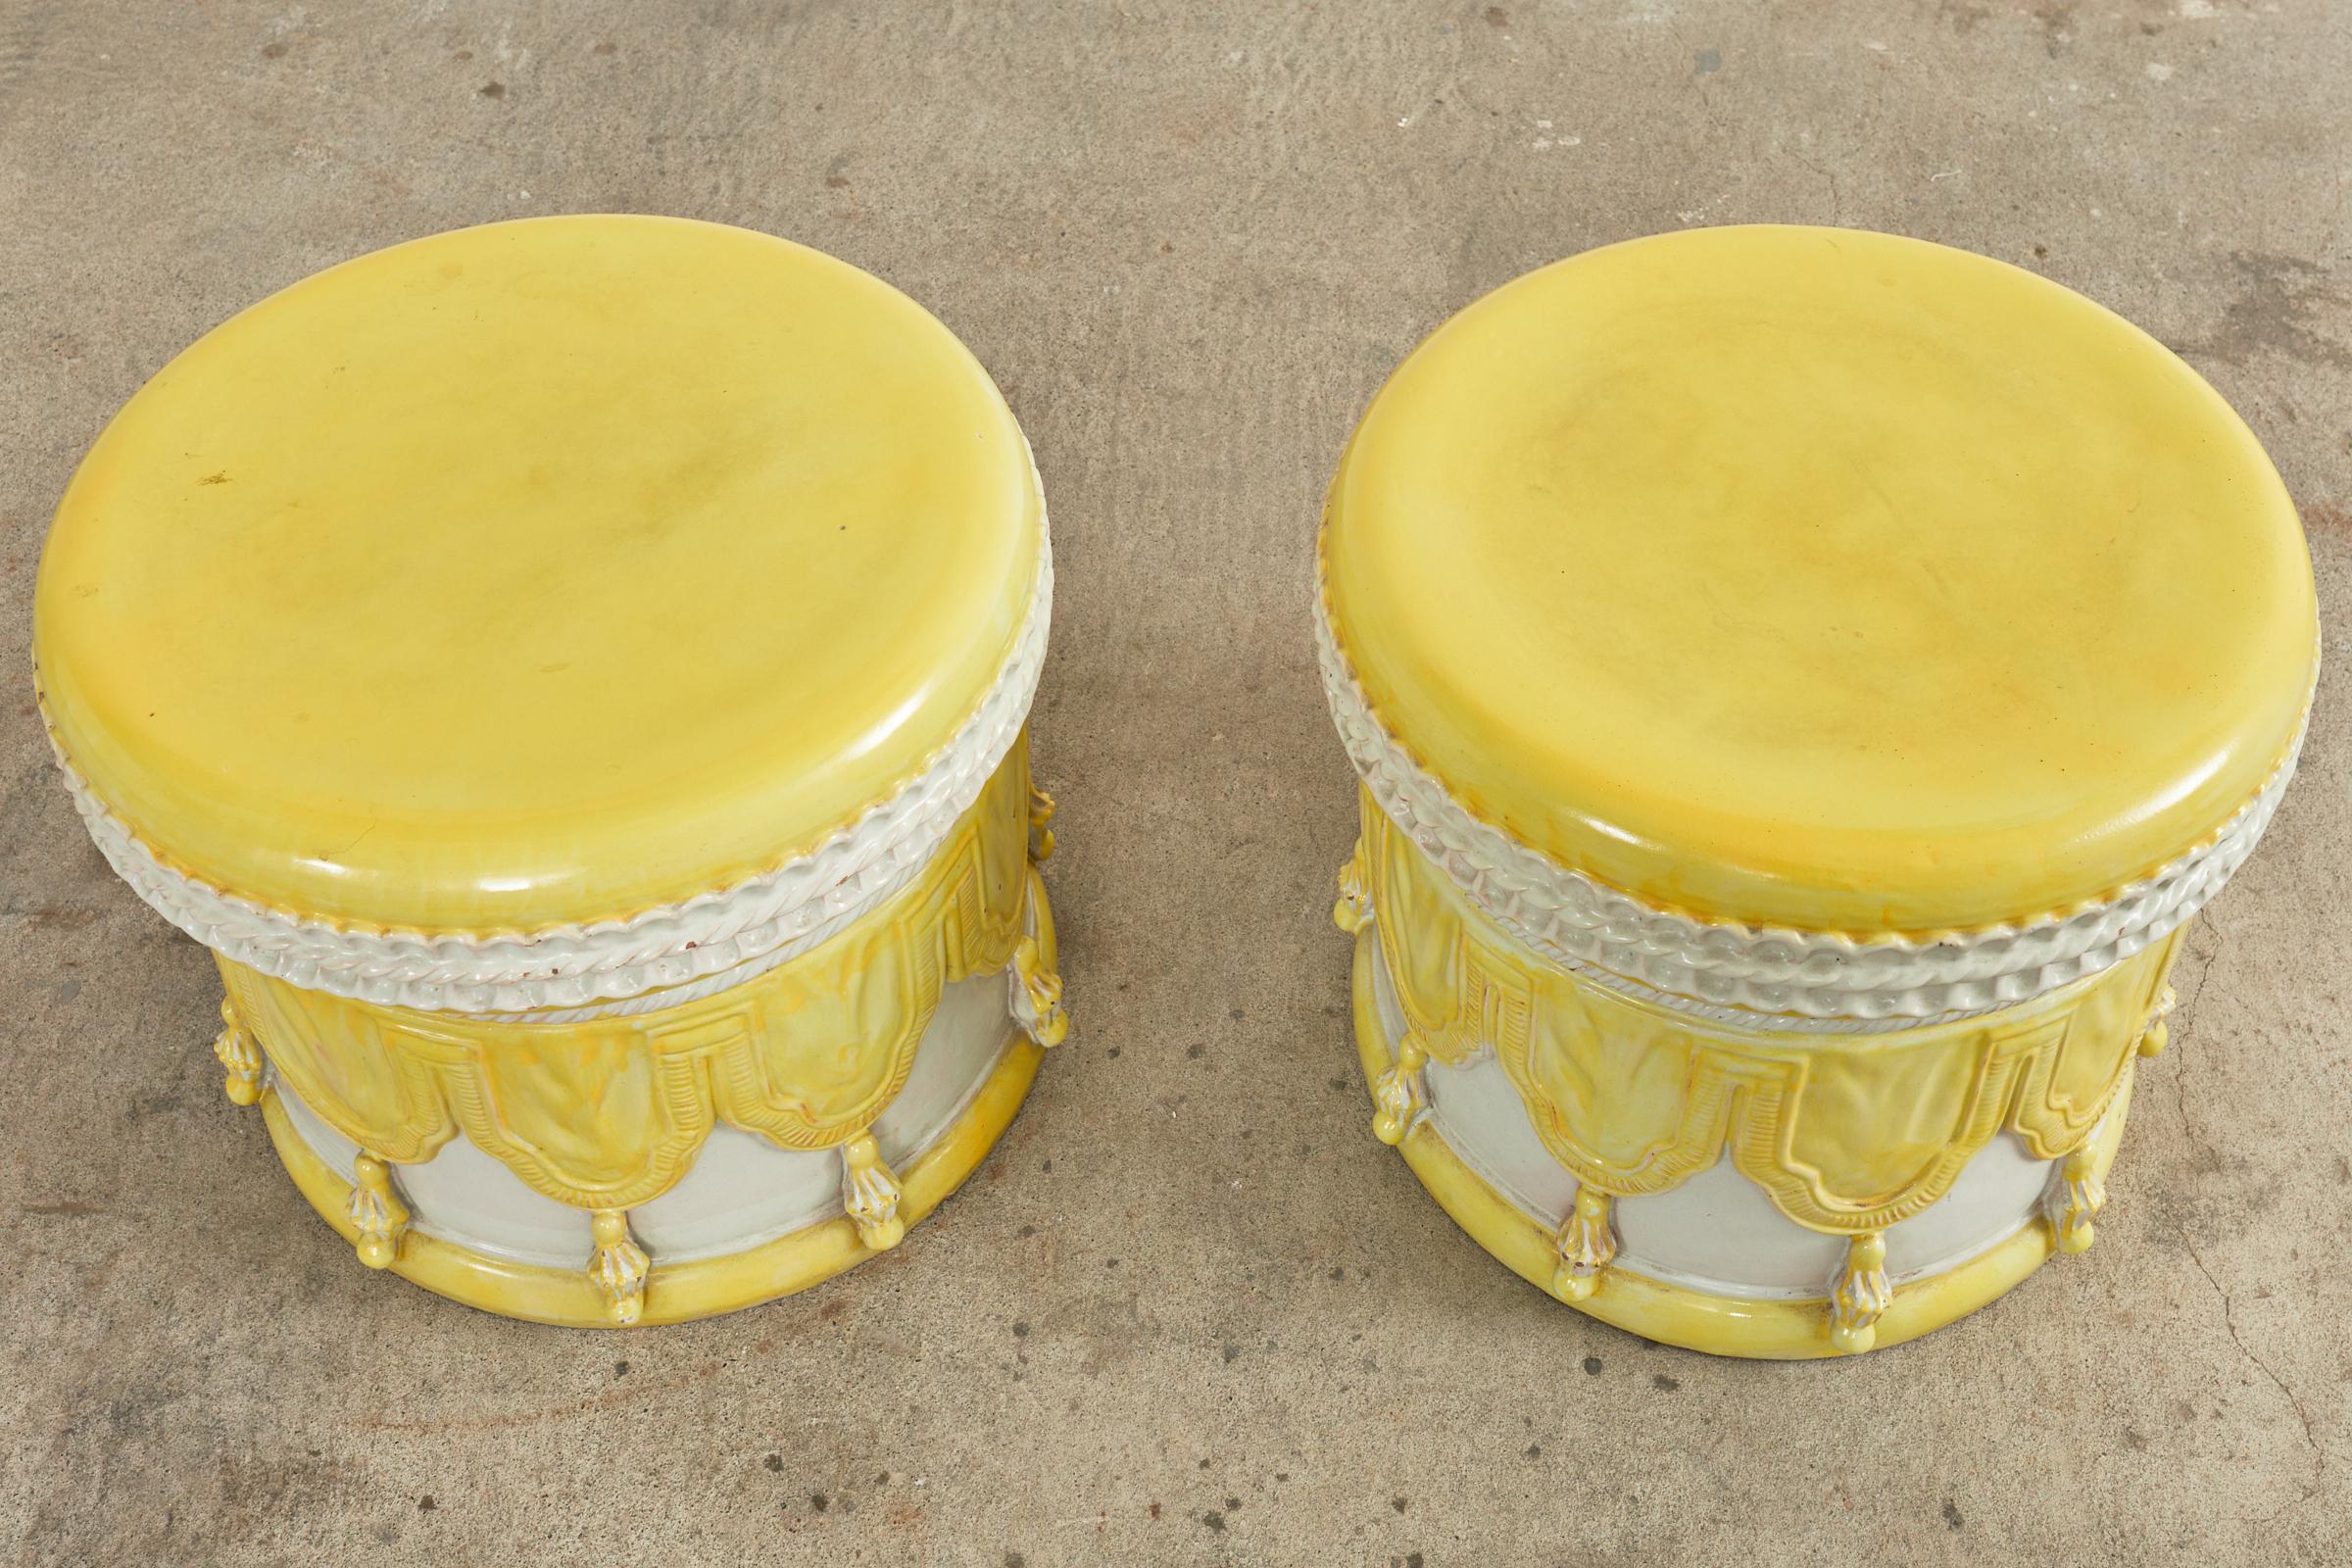 Whimsical pair of Italian regency glazed ceramic garden stools or drinks table. The matched pair feature trompe l'oeil swag with tassels on the sides of the drum form bodies. Beautifully finished in a citron yellow with white. The tops resemble